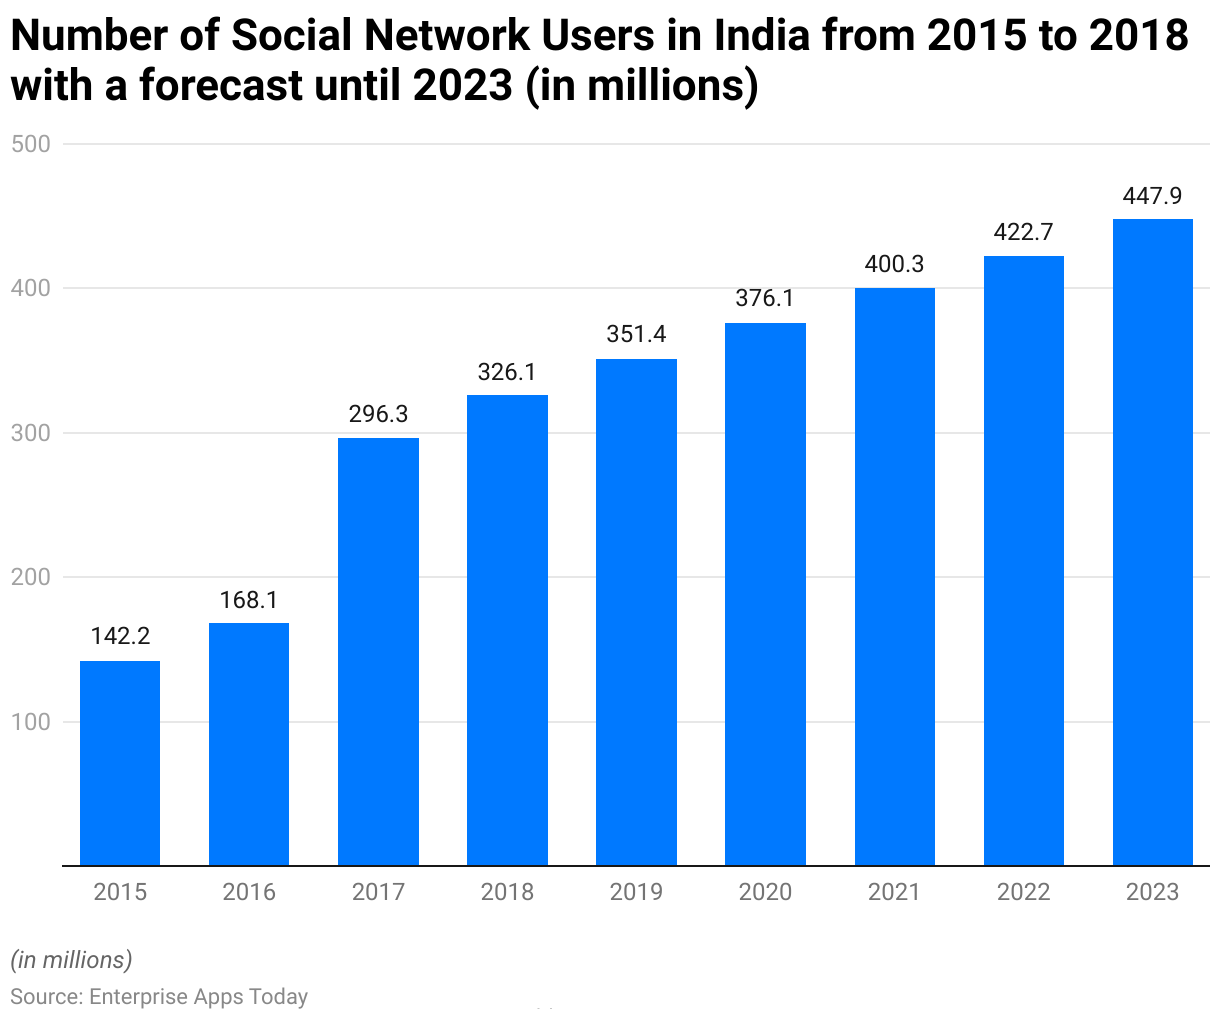 Number of Social Network Users in India from 2015 to 2018 with a forecast until 2023 (in millions) 